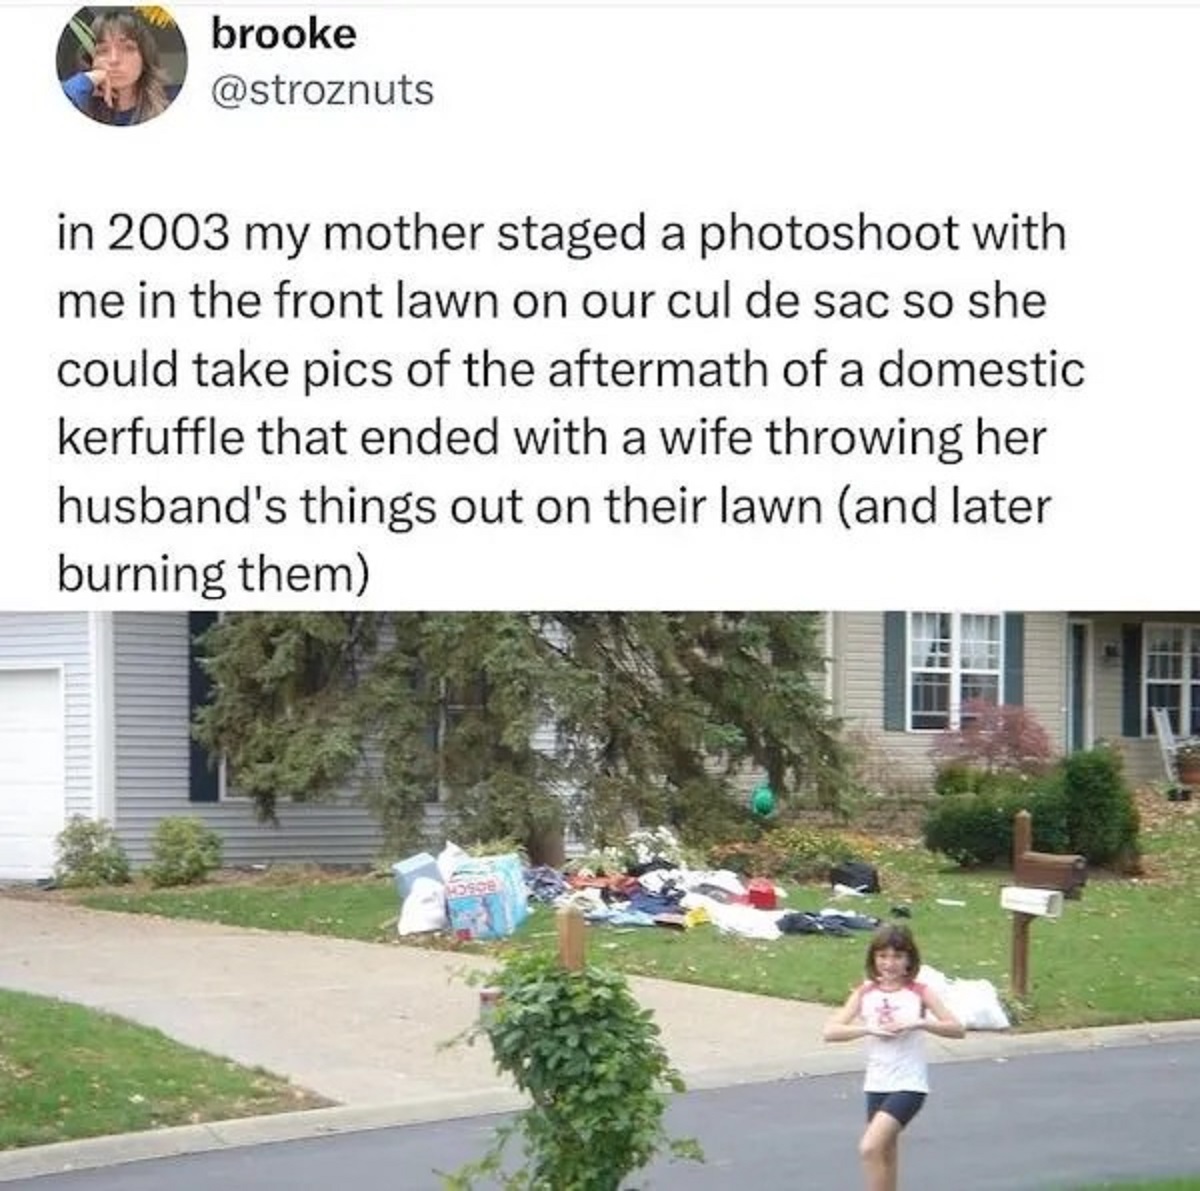 tree - brooke in 2003 my mother staged a photoshoot with me in the front lawn on our cul de sac so she could take pics of the aftermath of a domestic kerfuffle that ended with a wife throwing her husband's things out on their lawn and later burning them H